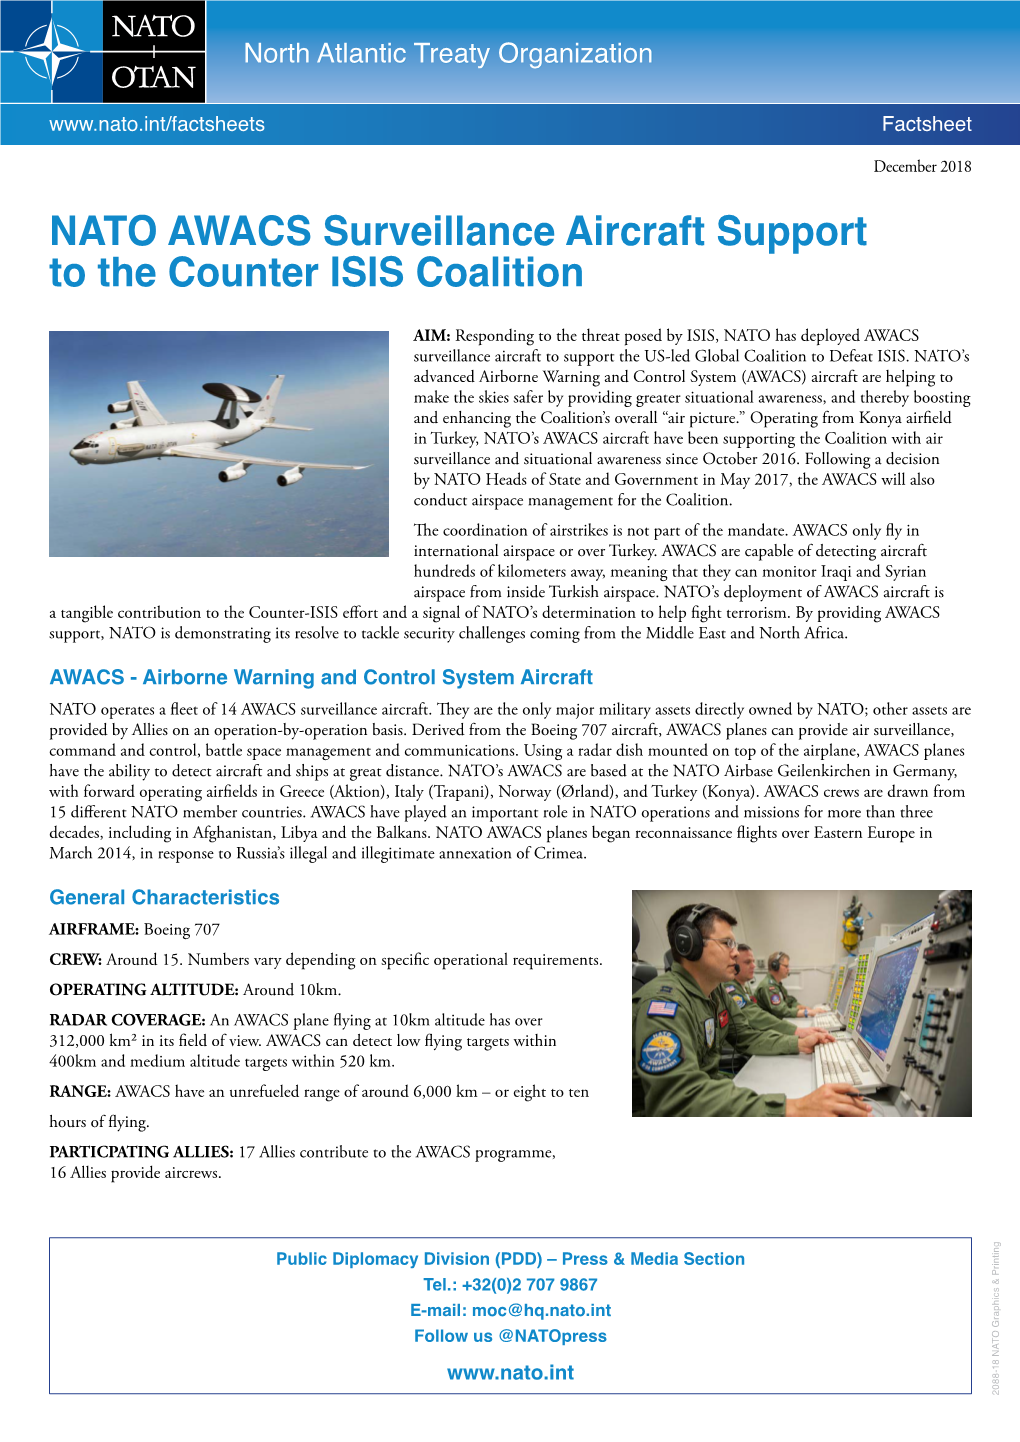 NATO AWACS Surveillance Aircraft Support to the Counter ISIL Coalition